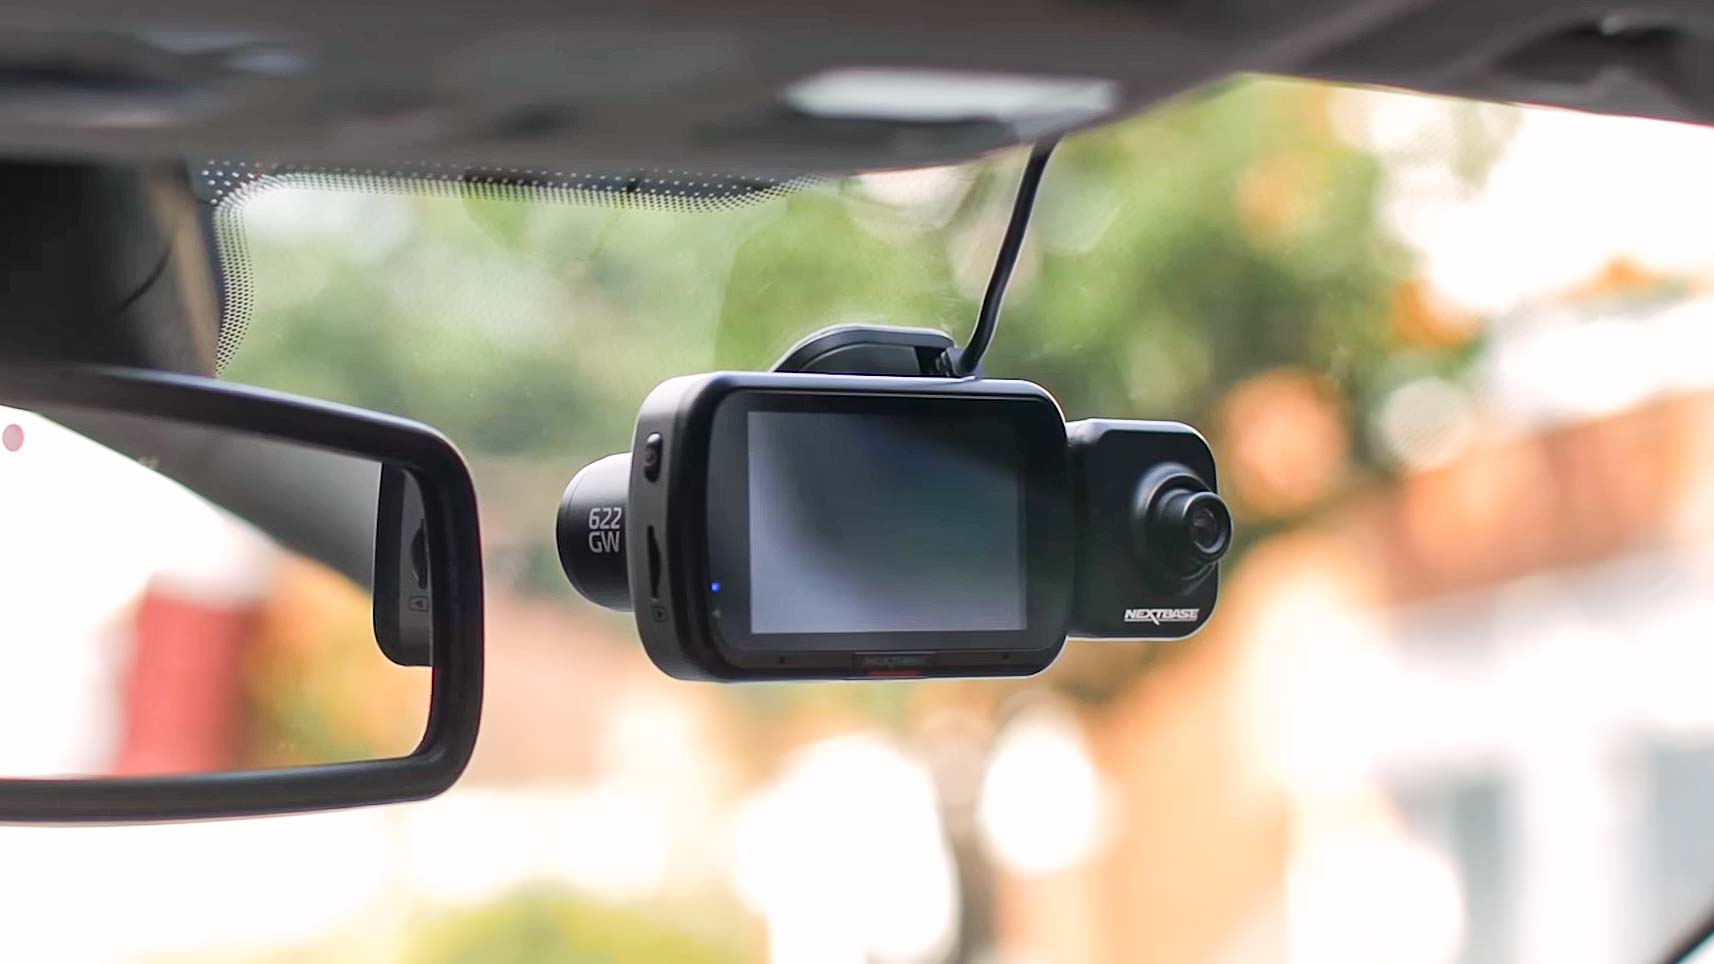 Nextbase 622GW Dash Cam hands-on: Advanced technology and